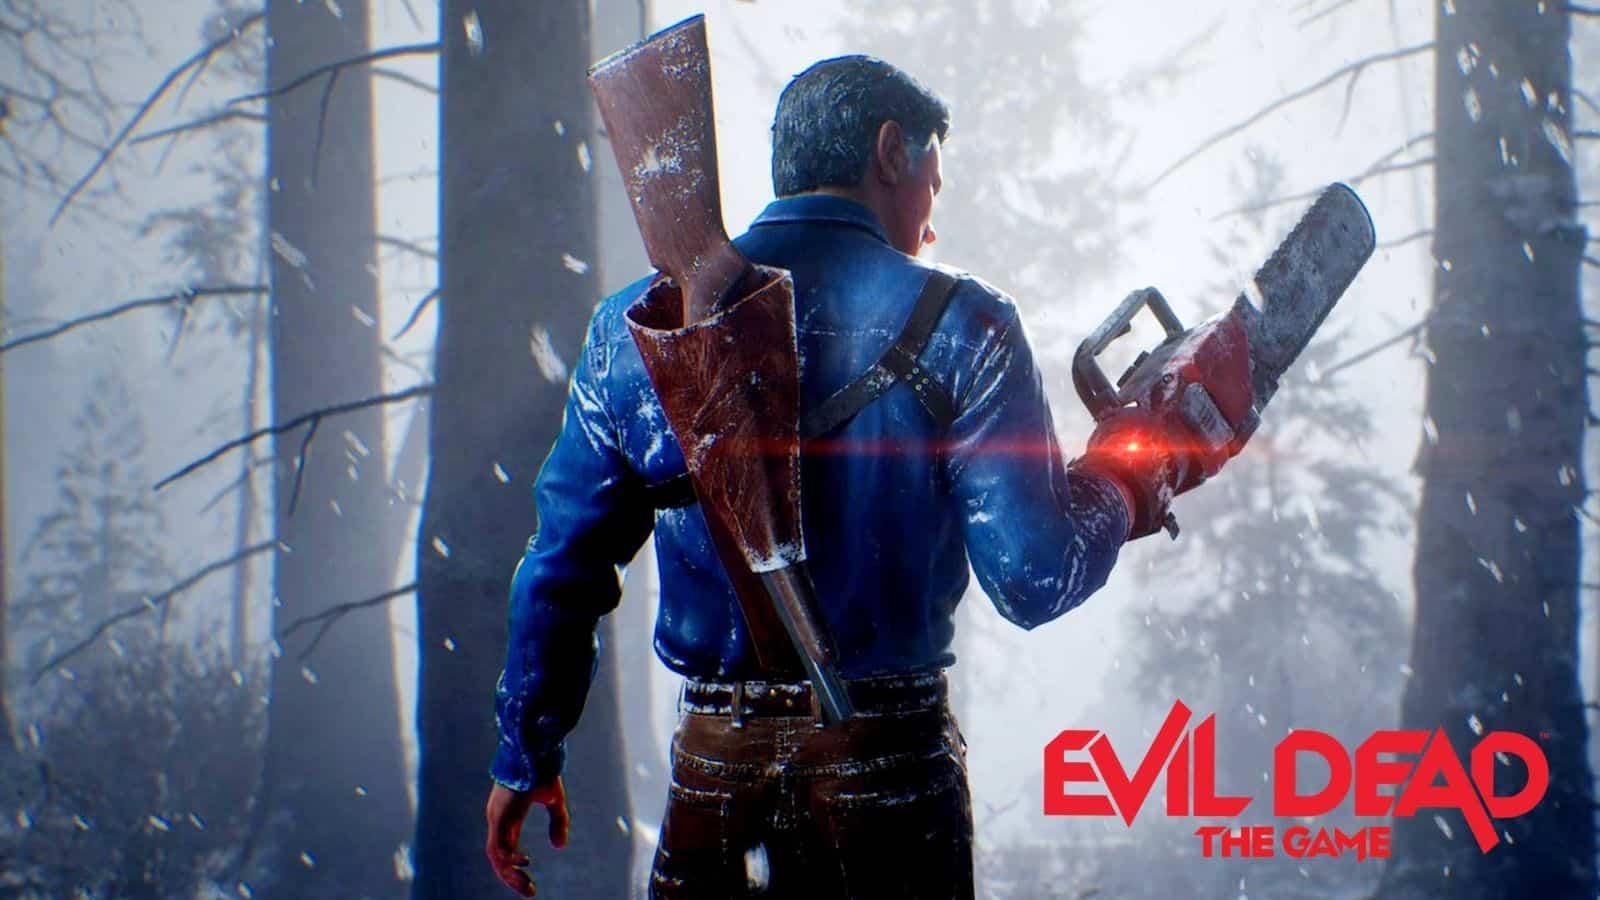 Is Evil Dead: The Game coming to Xbox Game Pass? - Dexerto